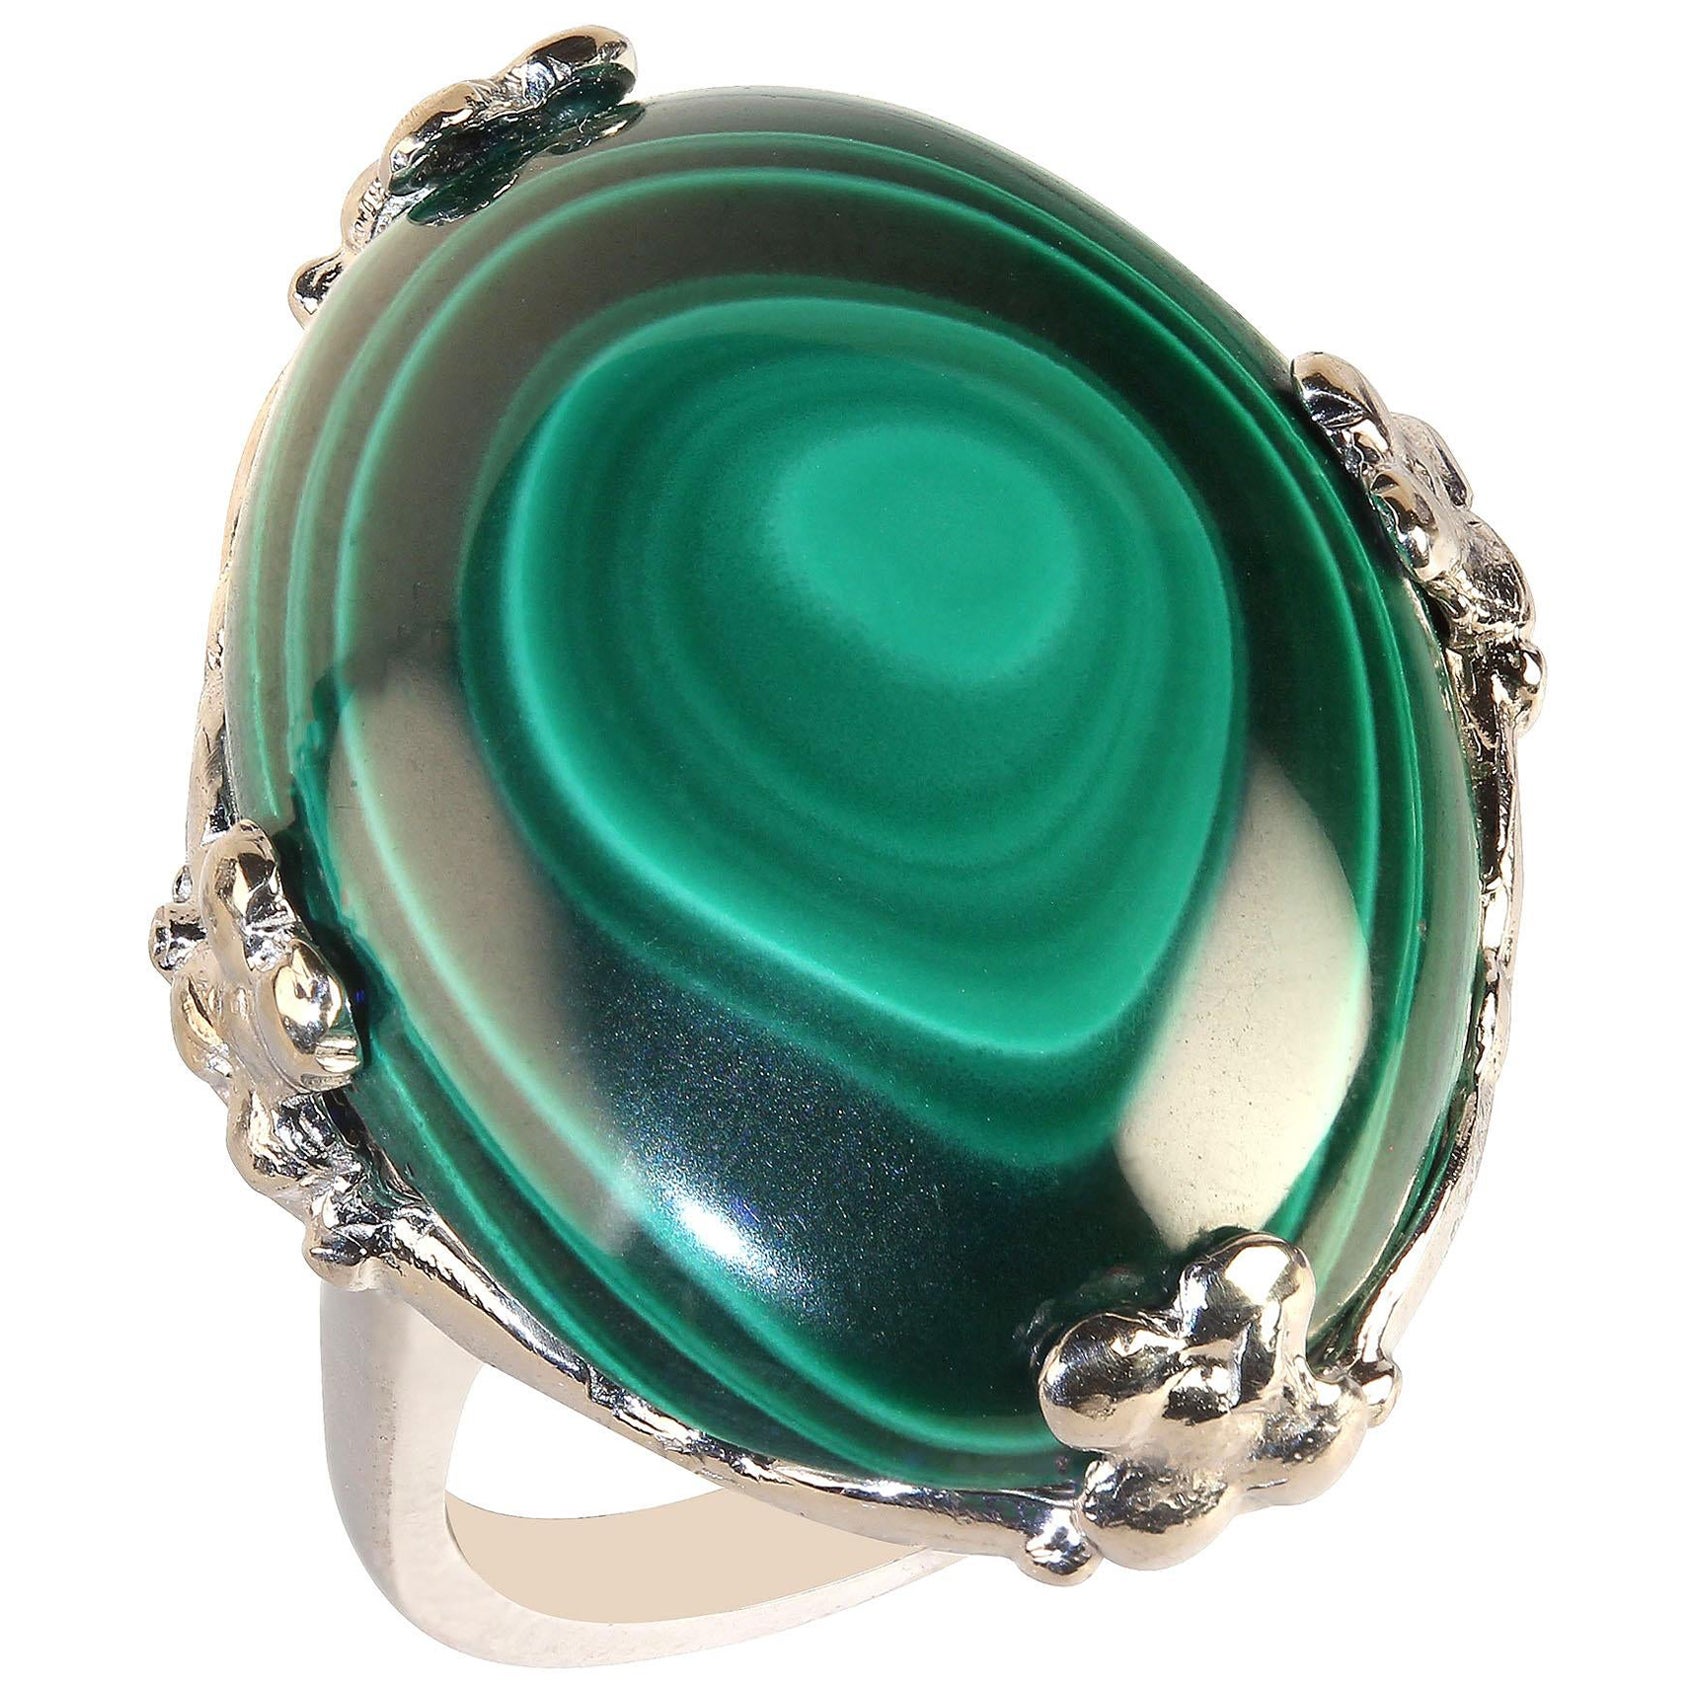 AJD Oval Malachite Cabochon in Handmade 14K White Gold Ring